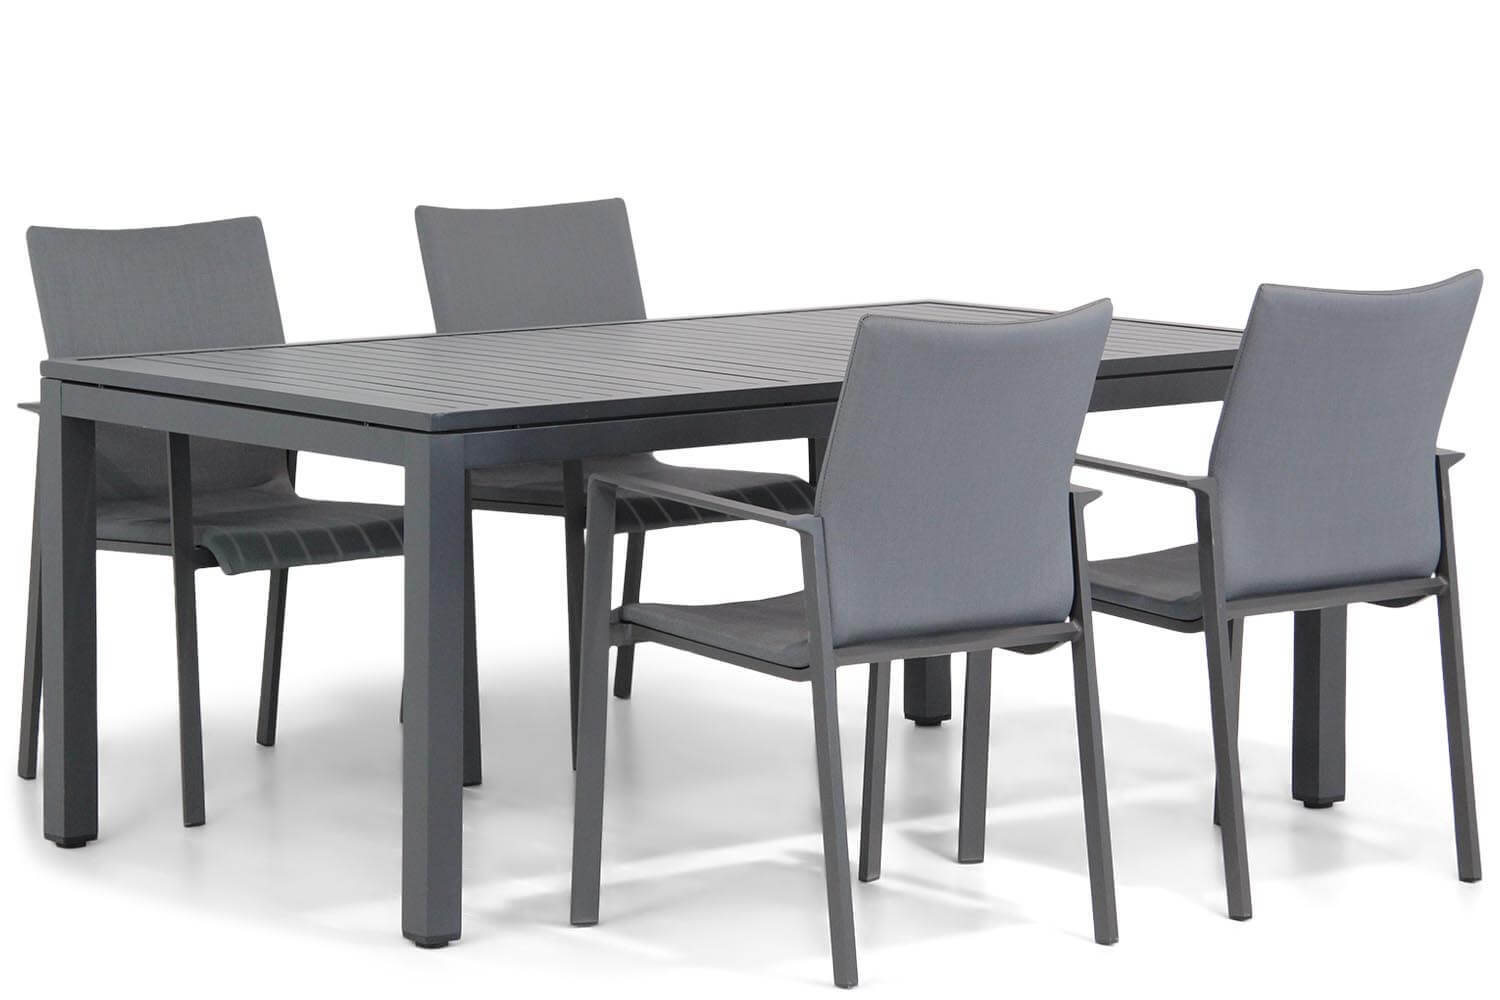 Lifestyle Garden Furniture Rome/Concept 160 cm dining tuinset 5-delig